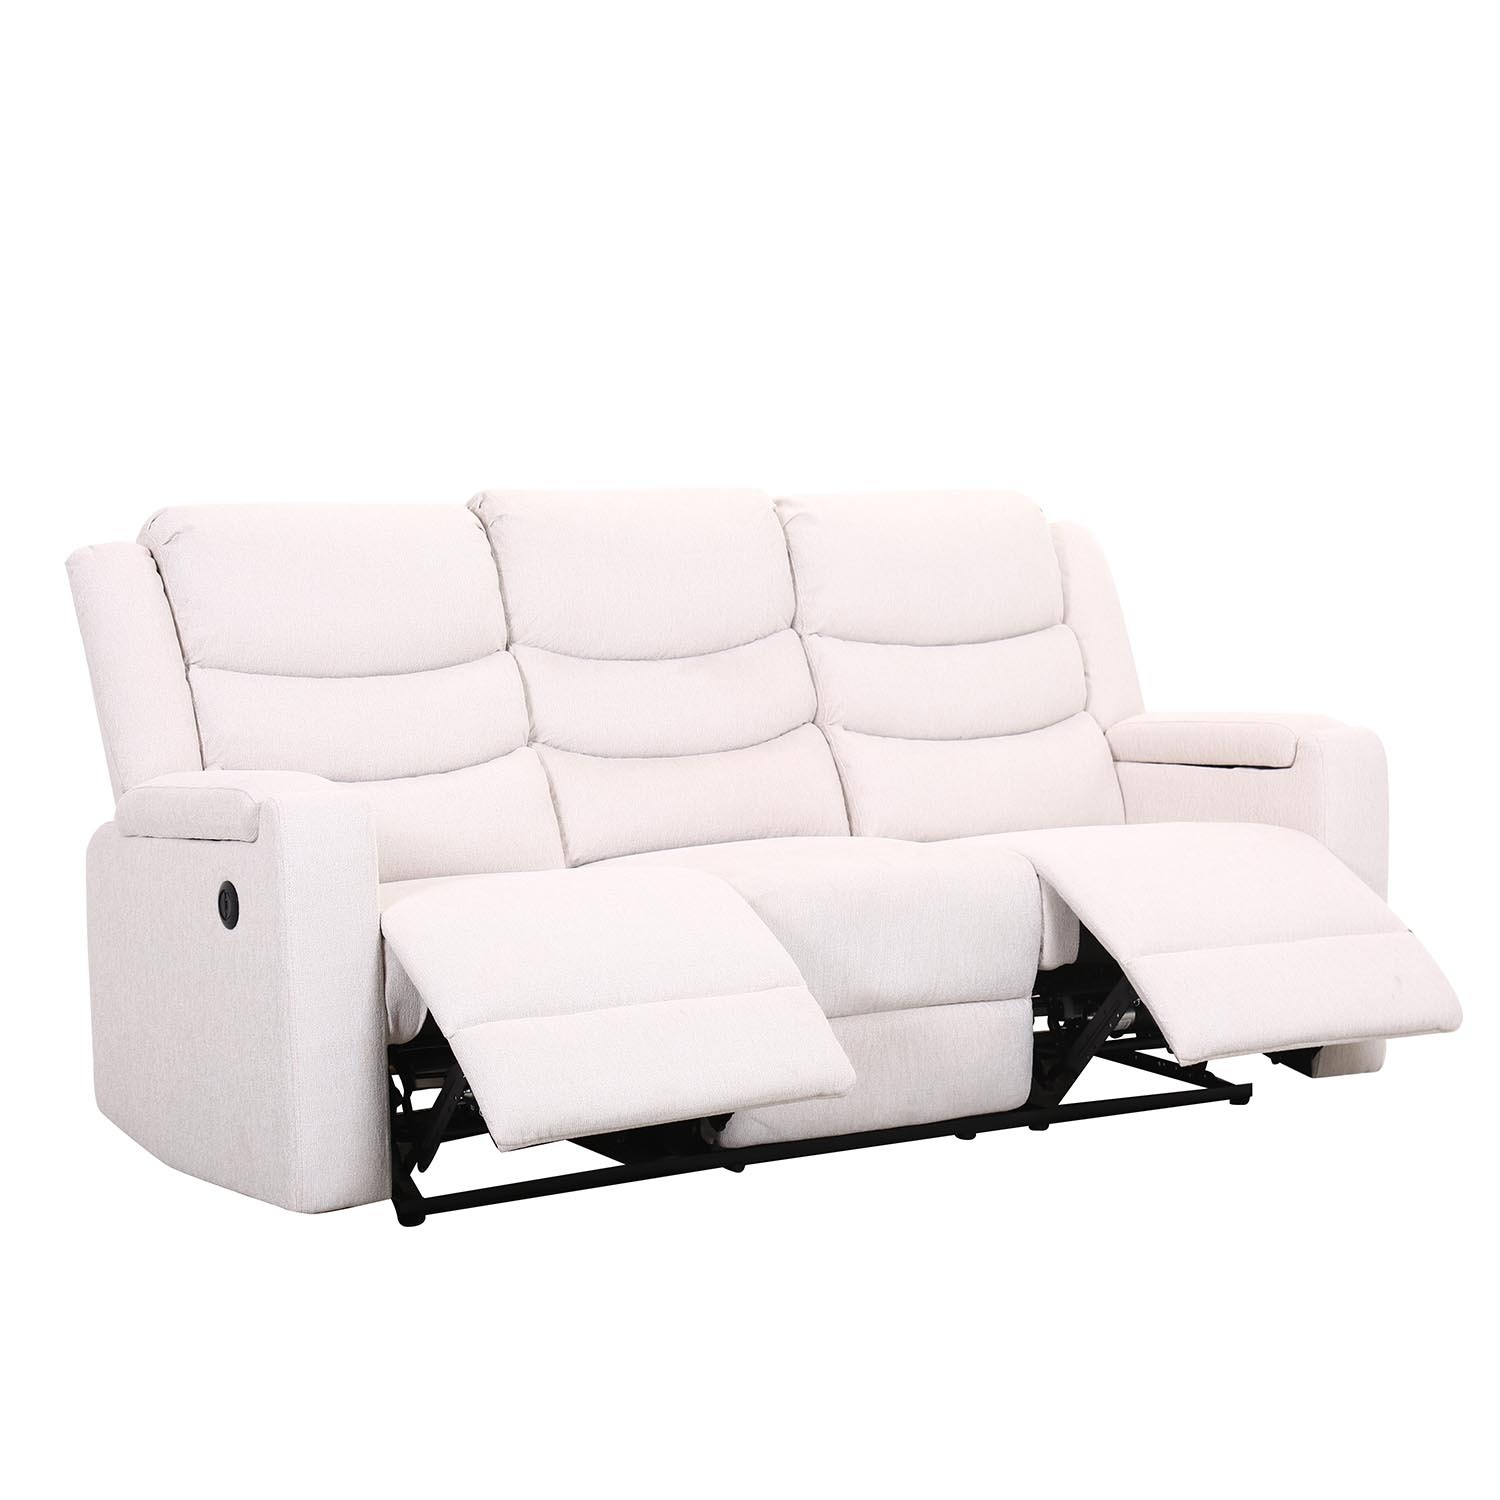 Heritage 3 Seater Ivory Recliner Sofa Image 3